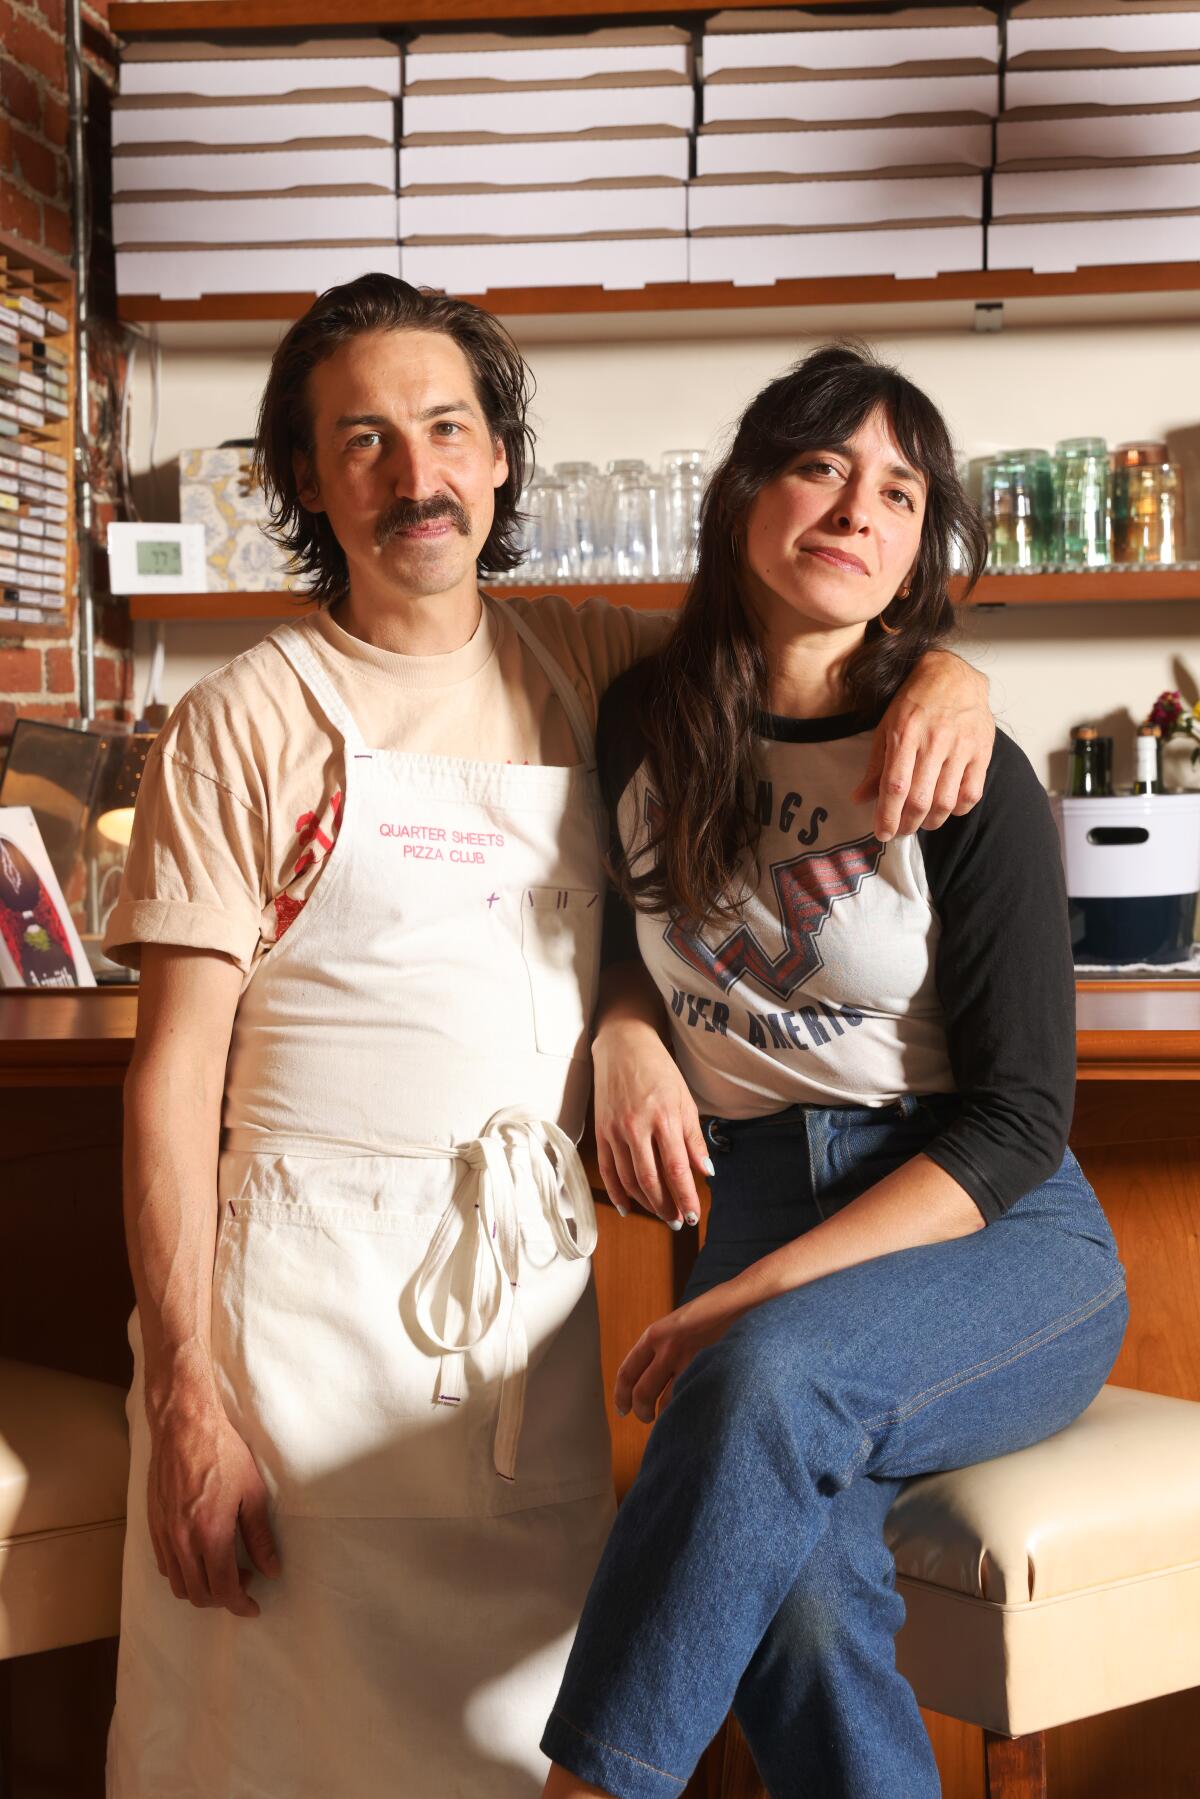 A man in a chef's apron stands next to a woman seated on a counter, his arm around her shoulder.